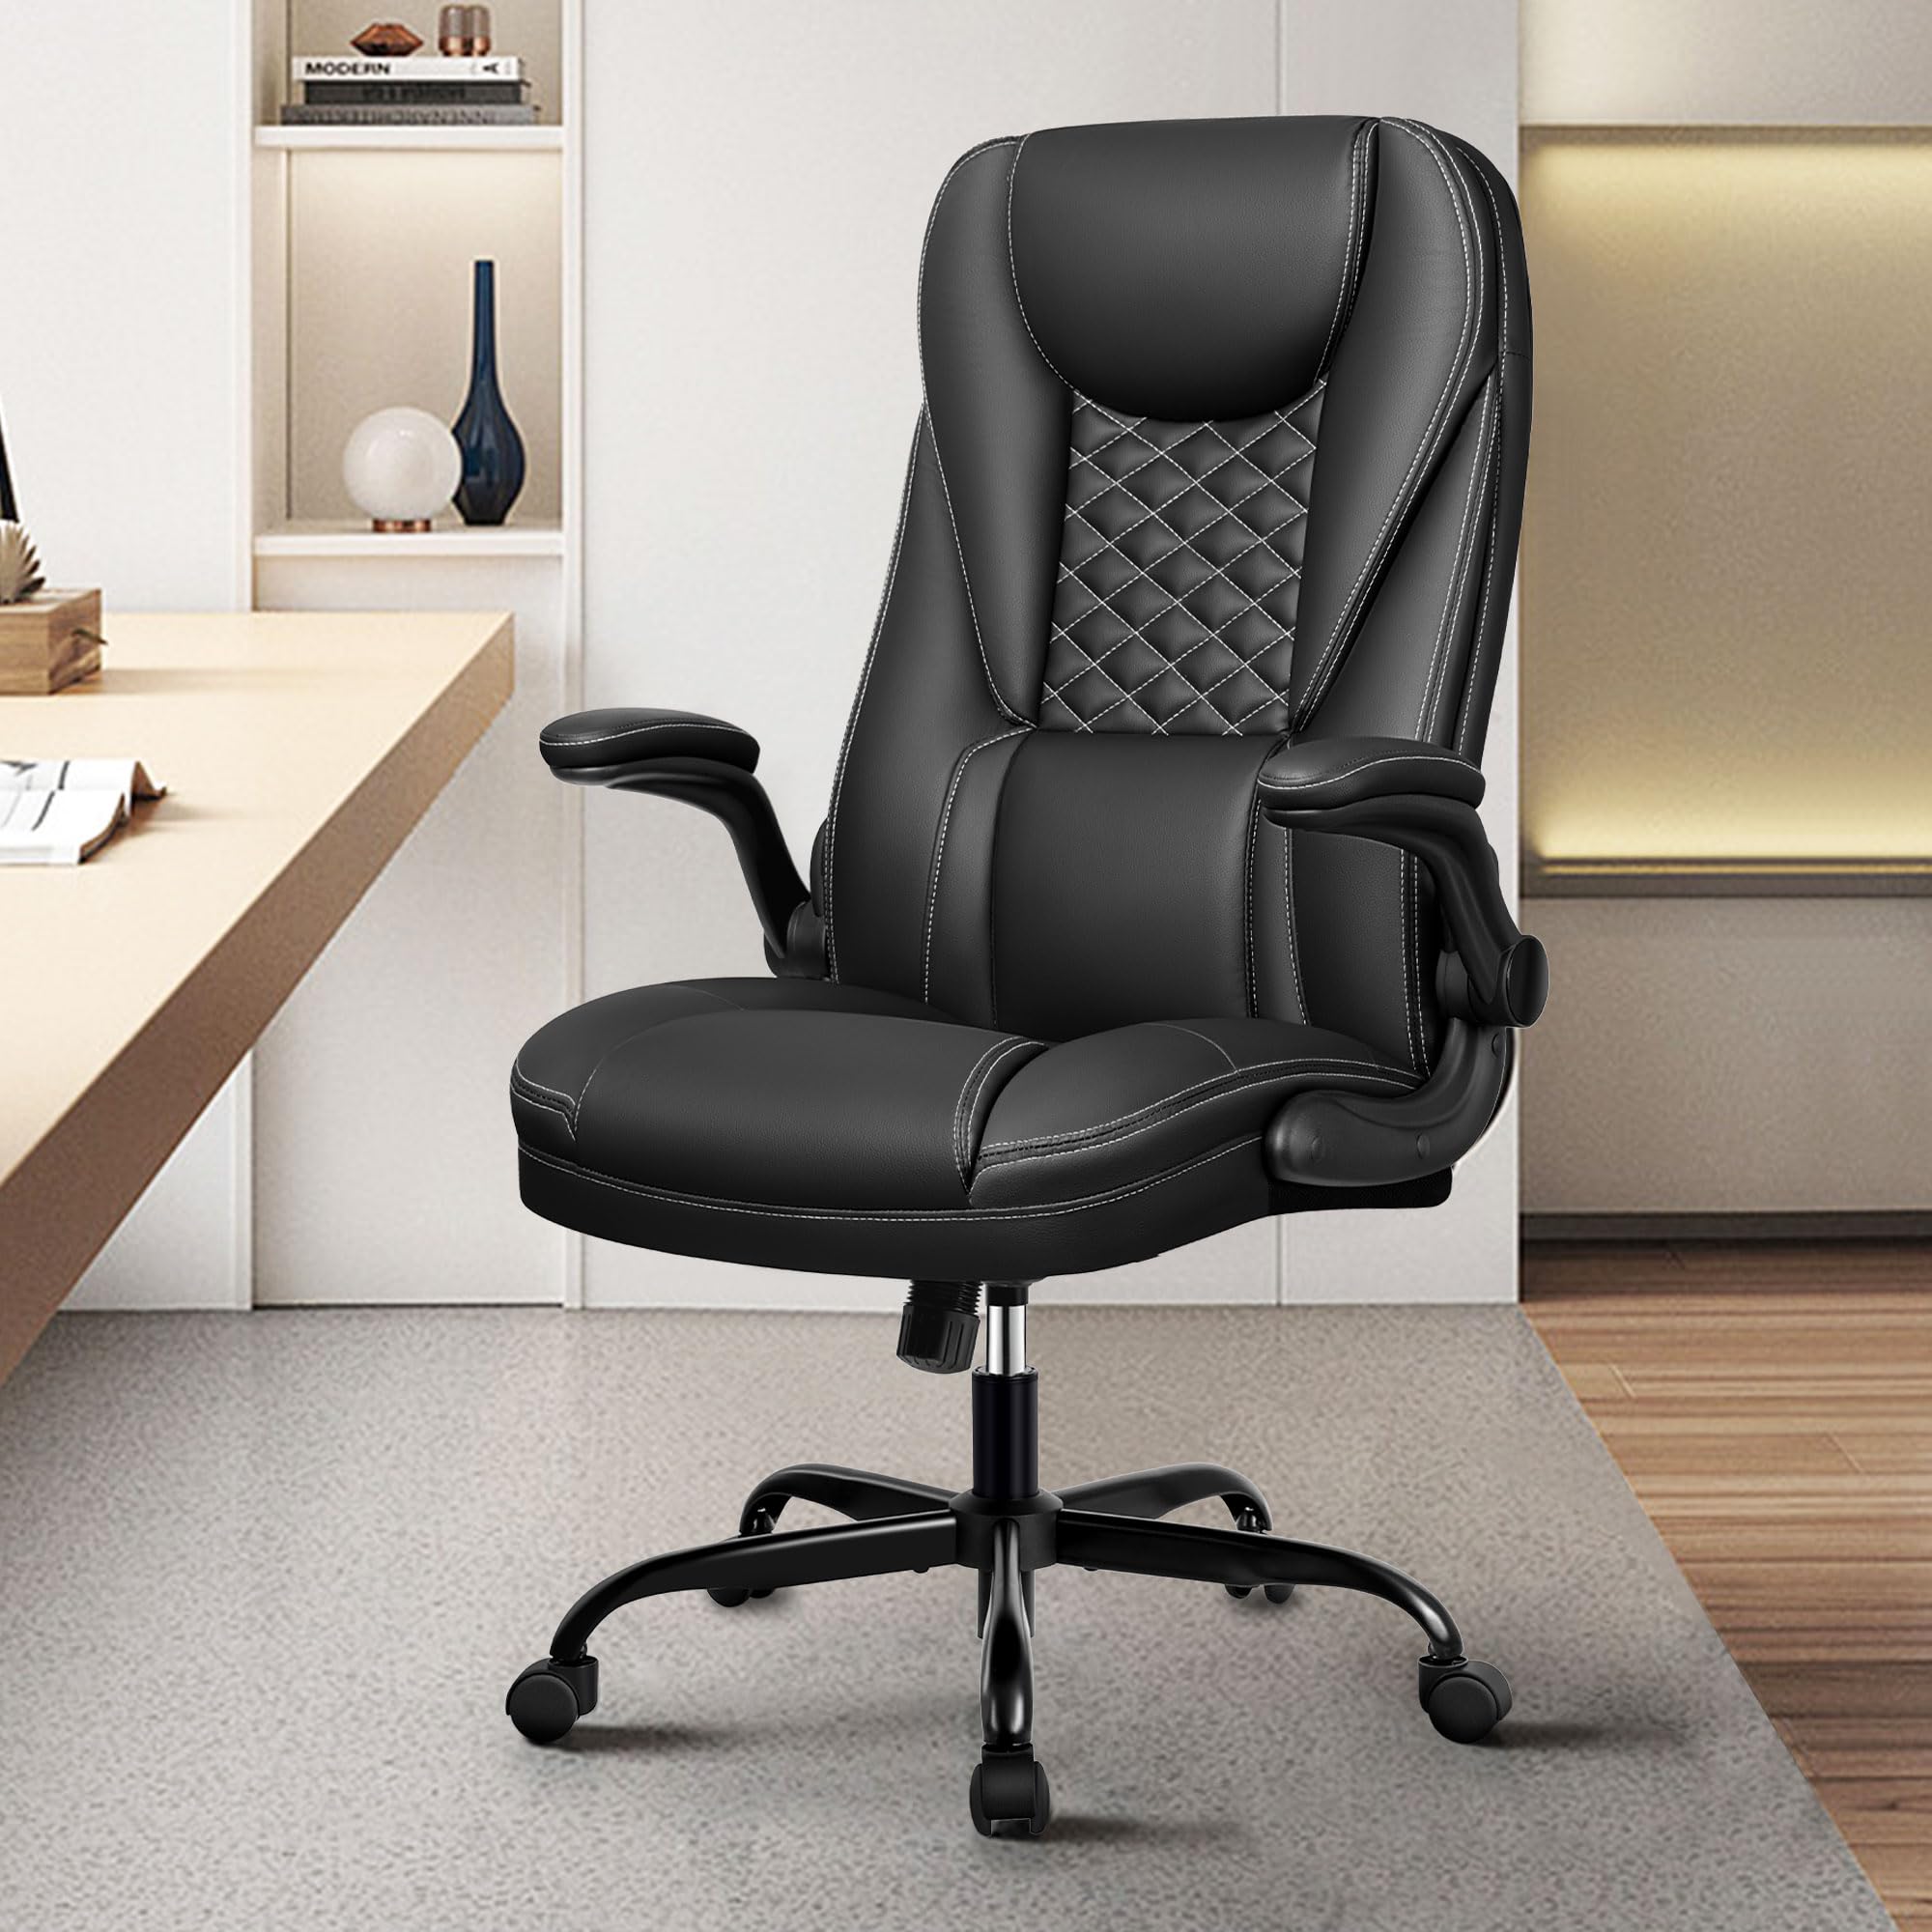 Guessky Office Chair, Big and Tall Office Chair Executive Office Chair Ergonomic Leather Chair with Lumbar Support High Back Home Office Desk Chairs Computer Chair with Adjustable Flip-Up Arms (Black)